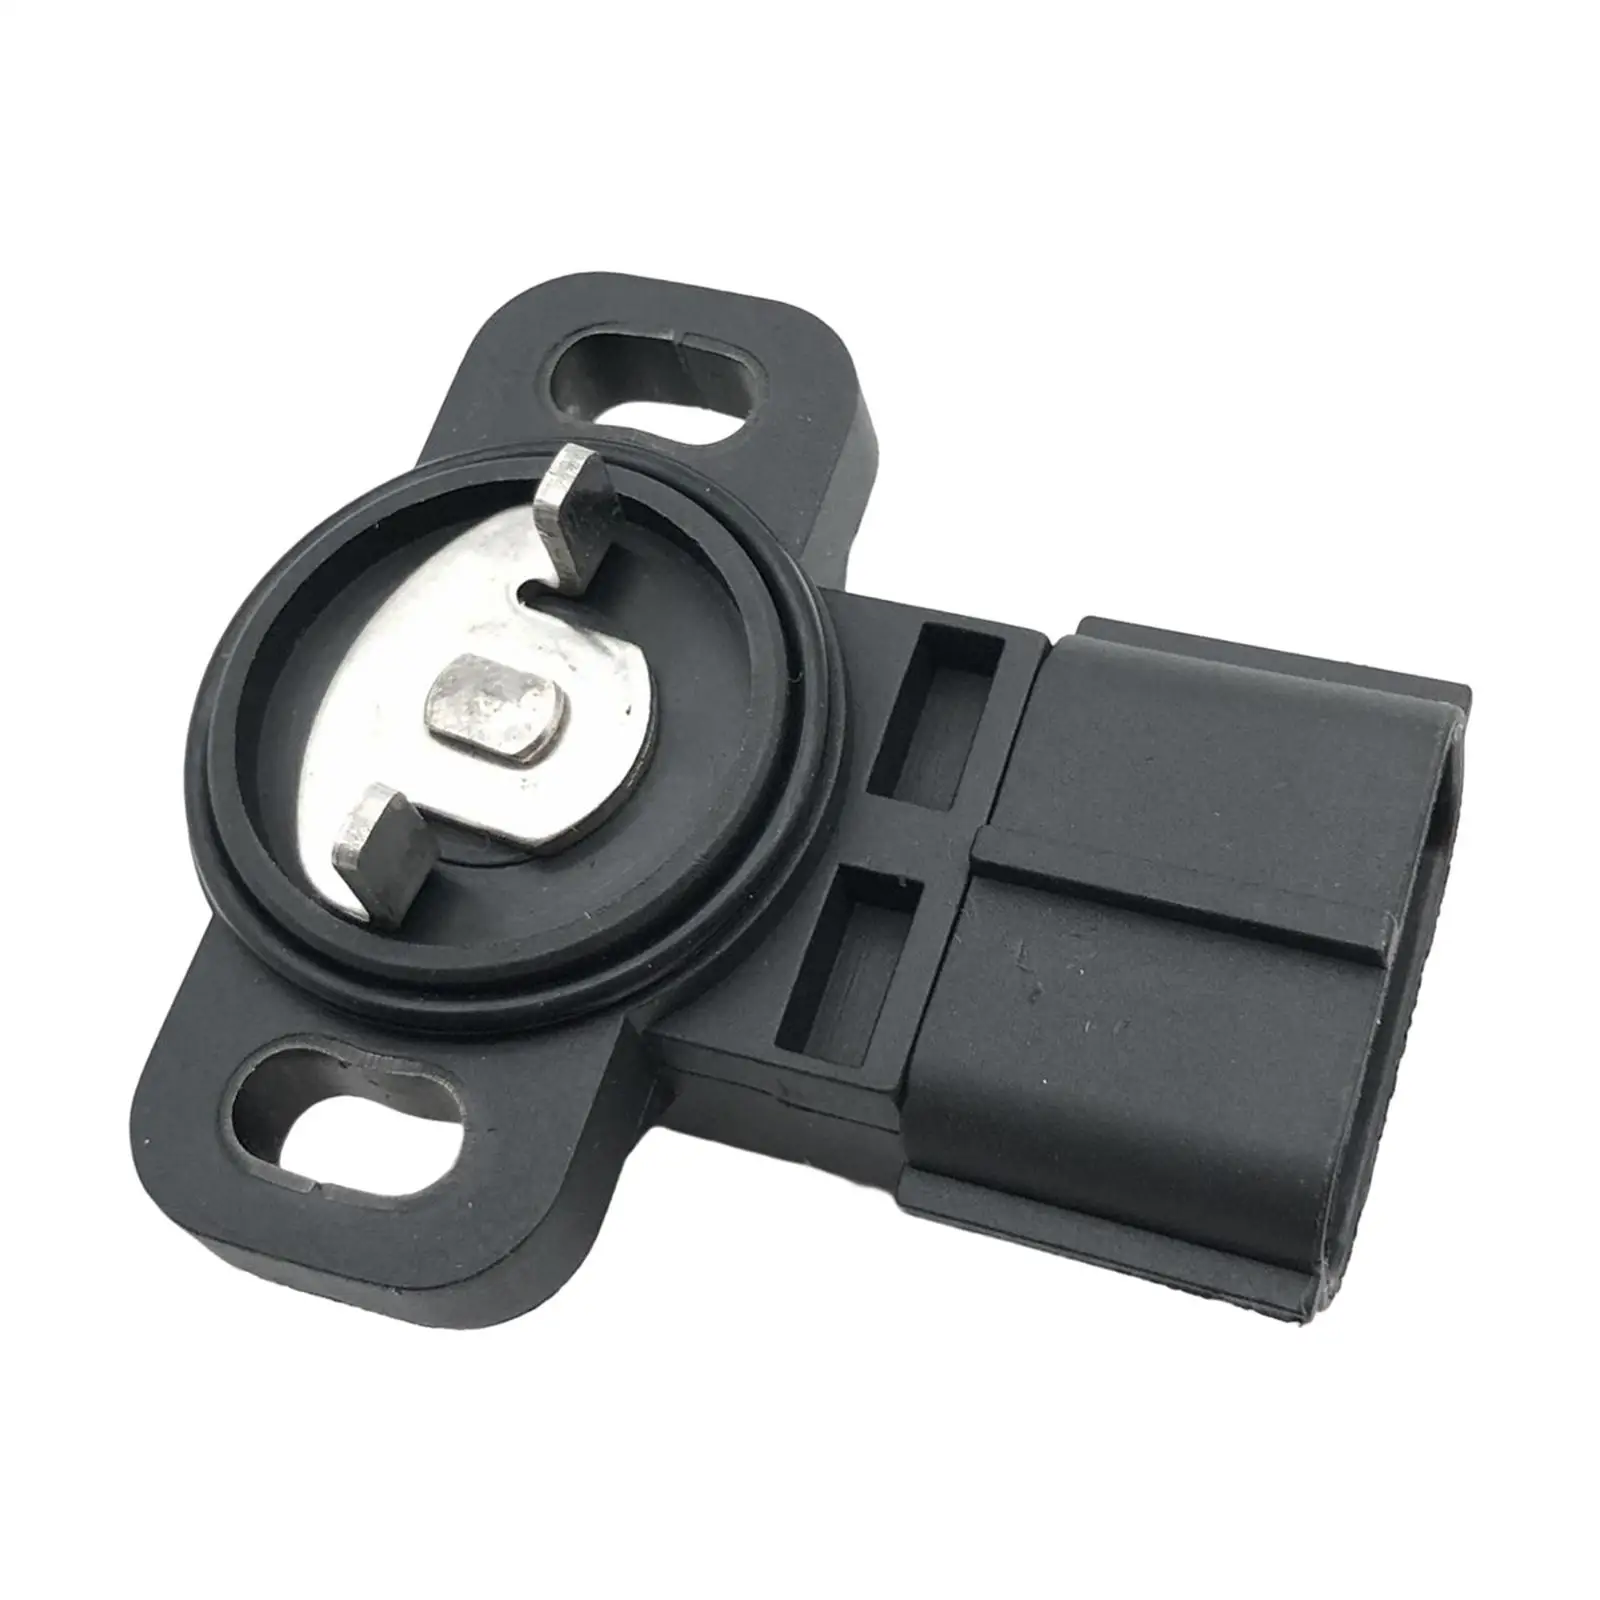 Automotive Throttle Position Sensor 35102-39000 3510239000 35102-33100 Tps Switch for Kia 3.5L Replace High Quality